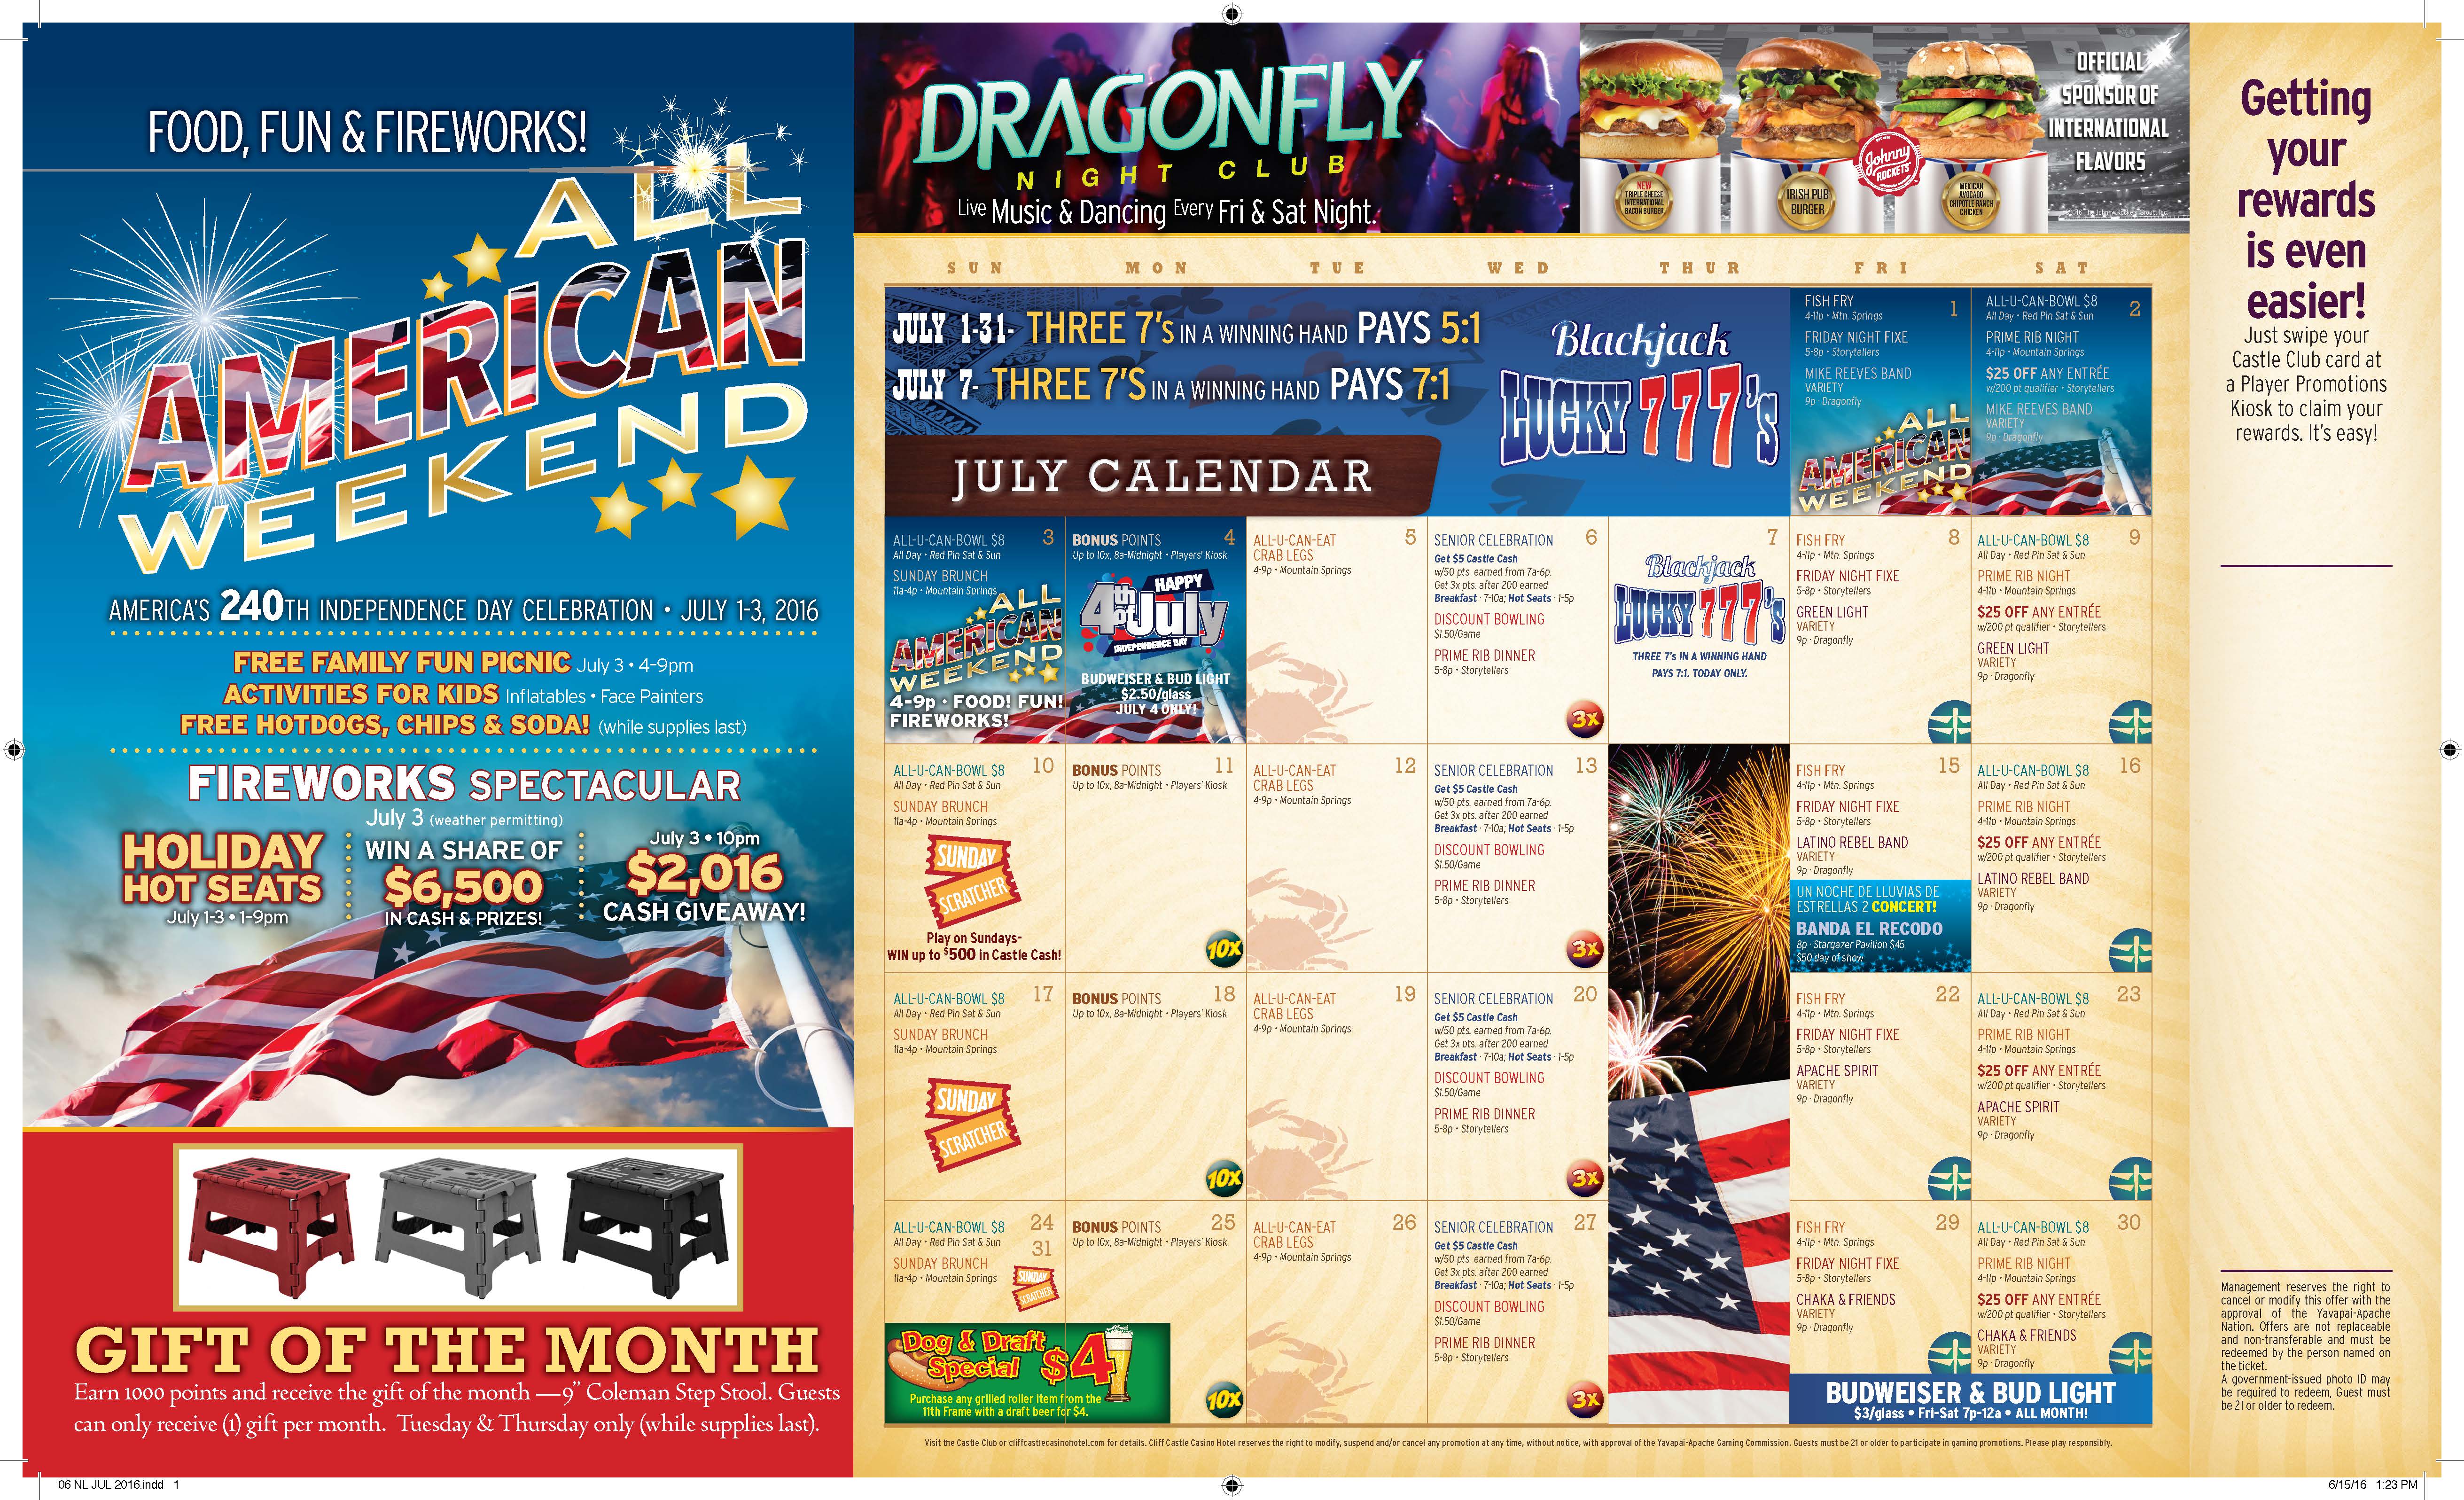 Tri-fold self-mailing Newsletter interior, showing monthly casino promo, event calendar and ads for the various casino venues.